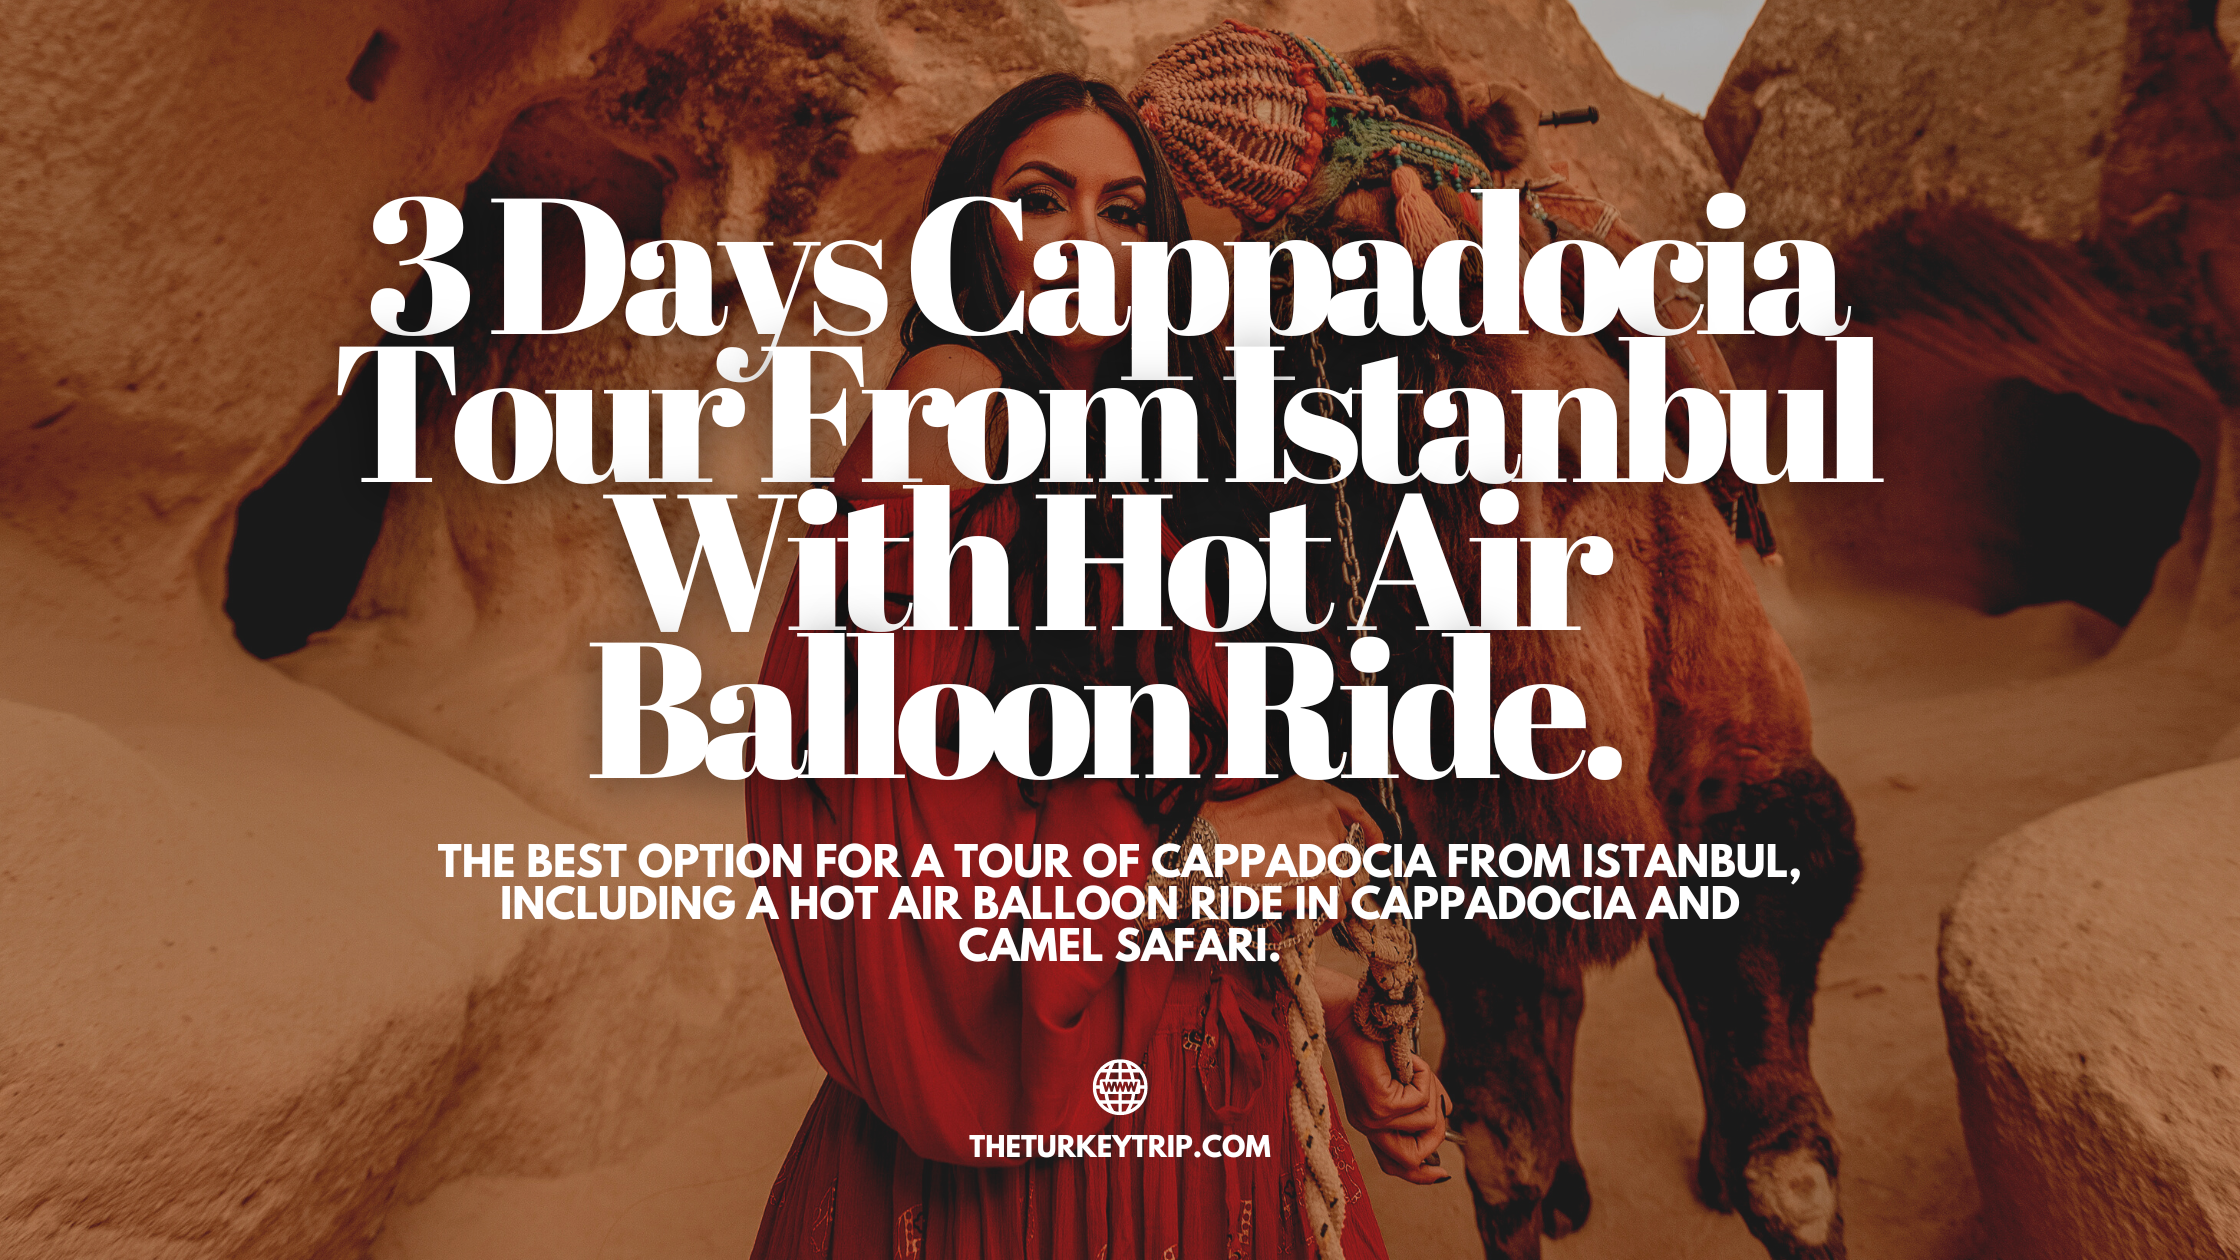 2 Nights 3 Days Cappadocia Tour Package From Istanbul Including Hot Air Balloon Ride & Camel Safari